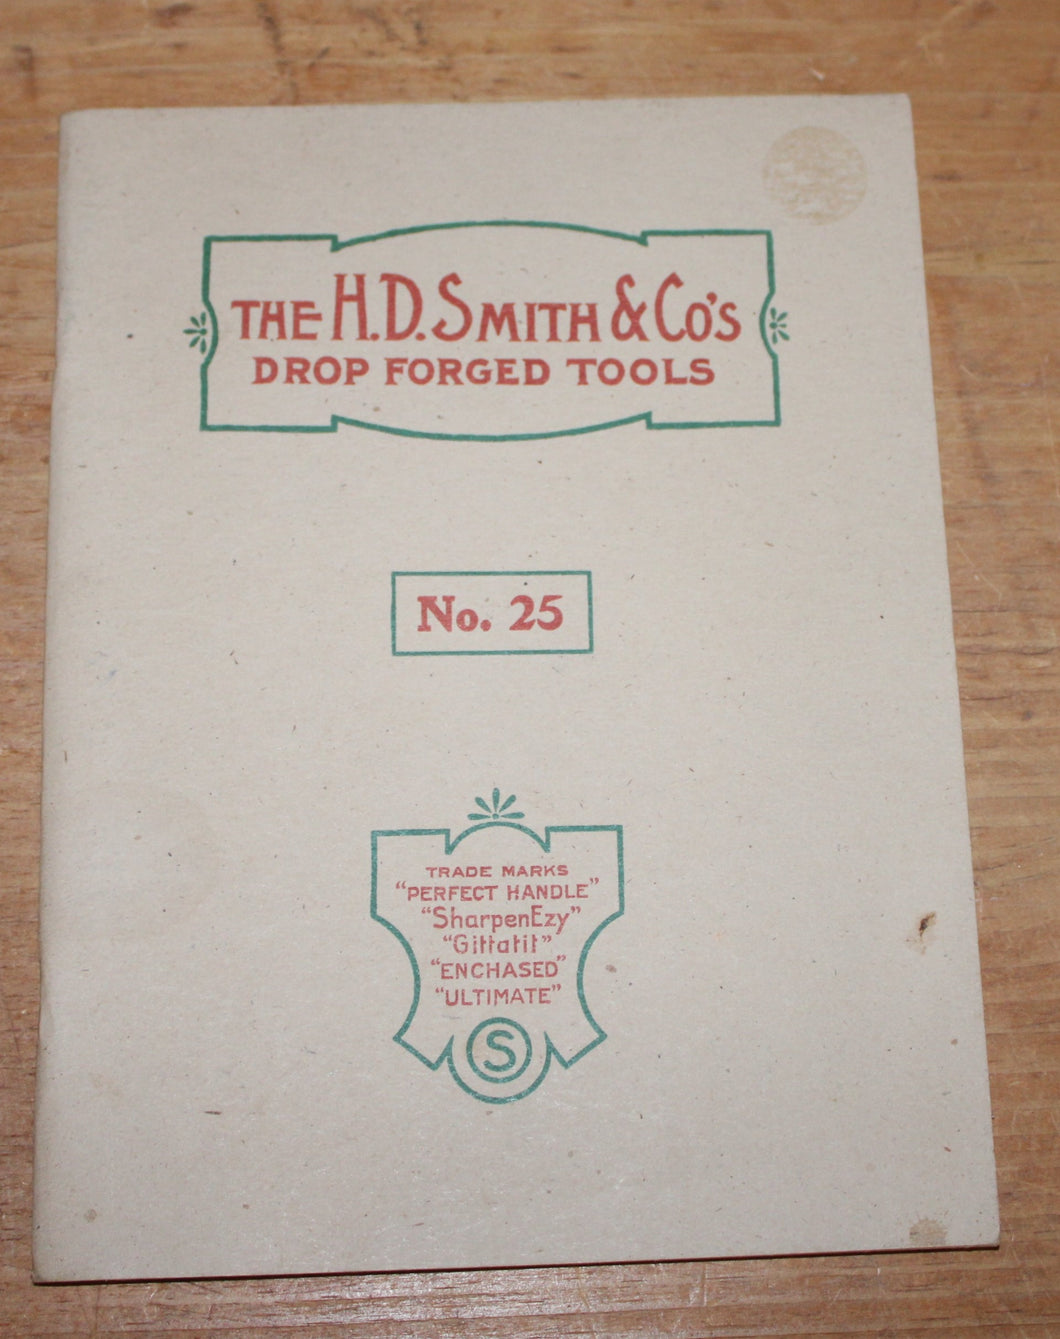 The H. D. Smith & Co's Drop Forged Tools Catalog No. 25